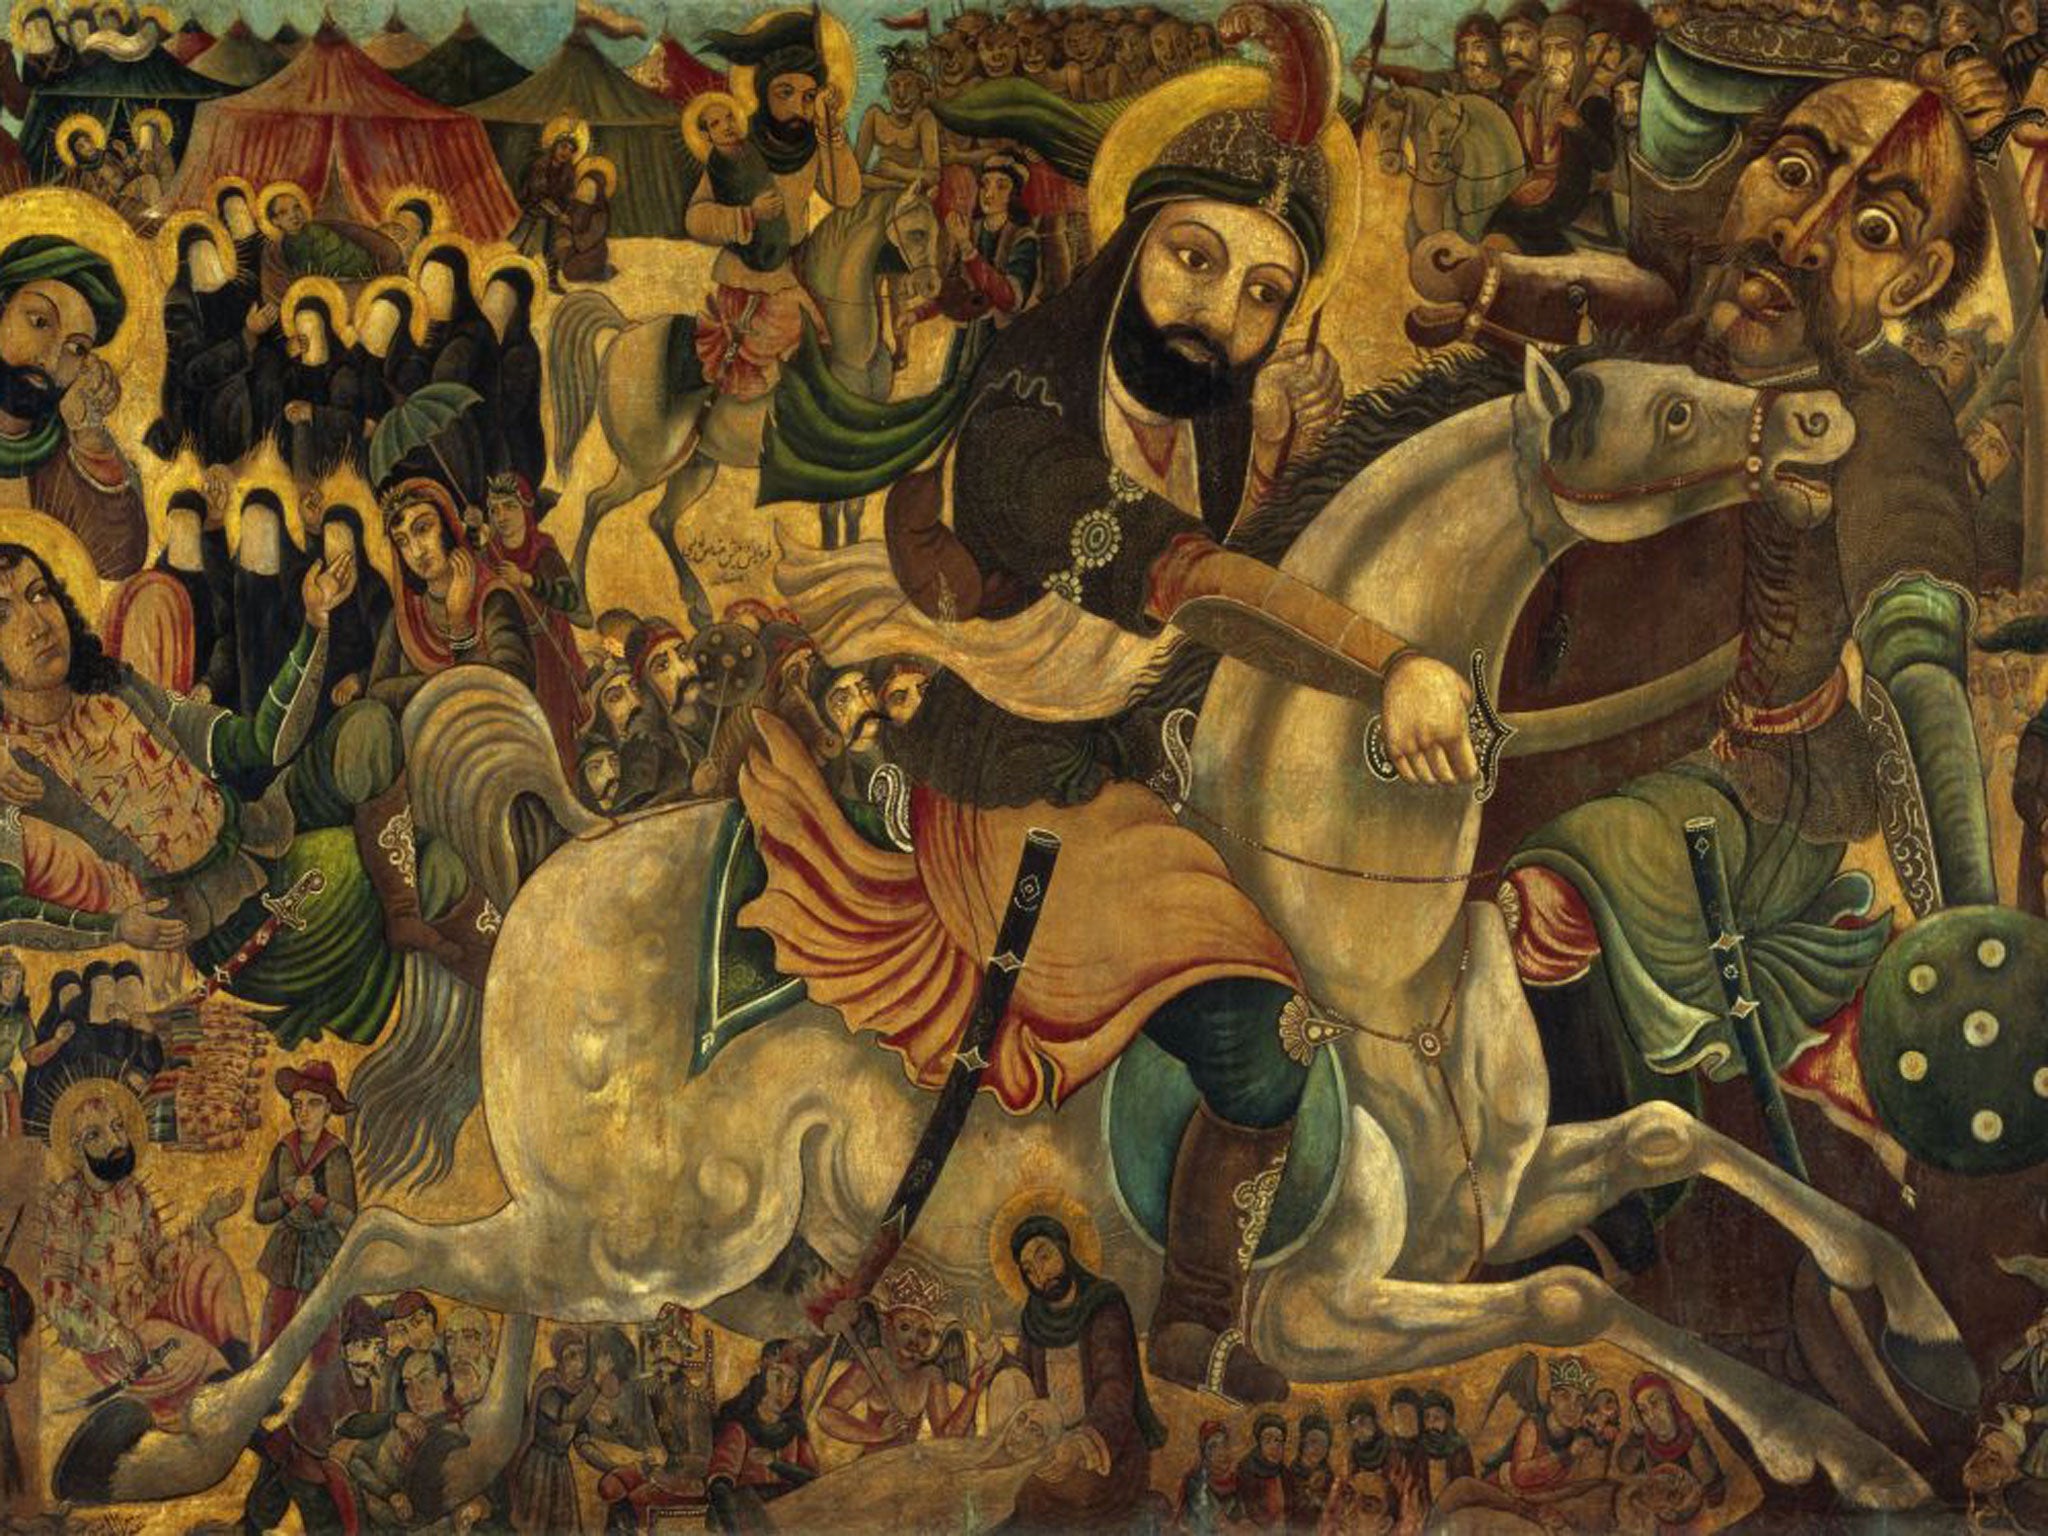 A painting of the Battle of Karbala in 680AD, in present day Iraq, which is remembered by both Sunnis and Shias